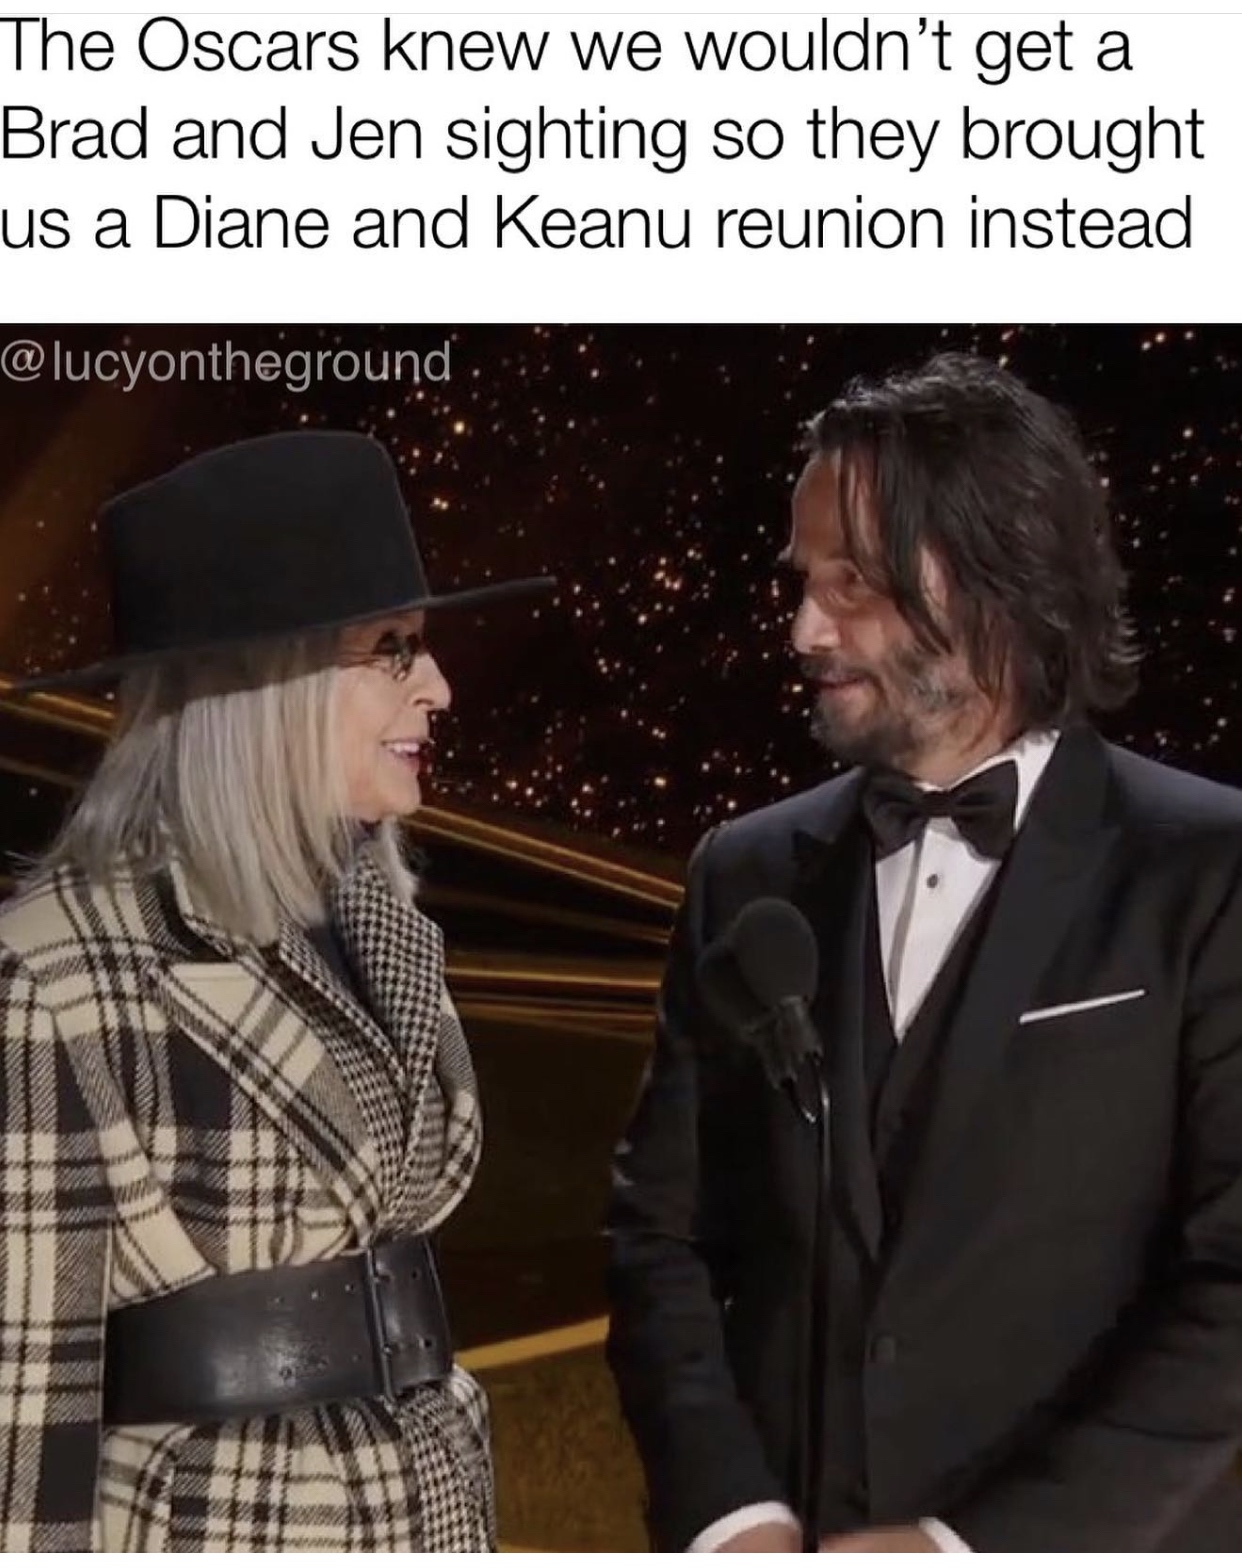 gentleman - The Oscars knew we wouldn't get a Brad and Jen sighting so they brought us a Diane and Keanu reunion instead